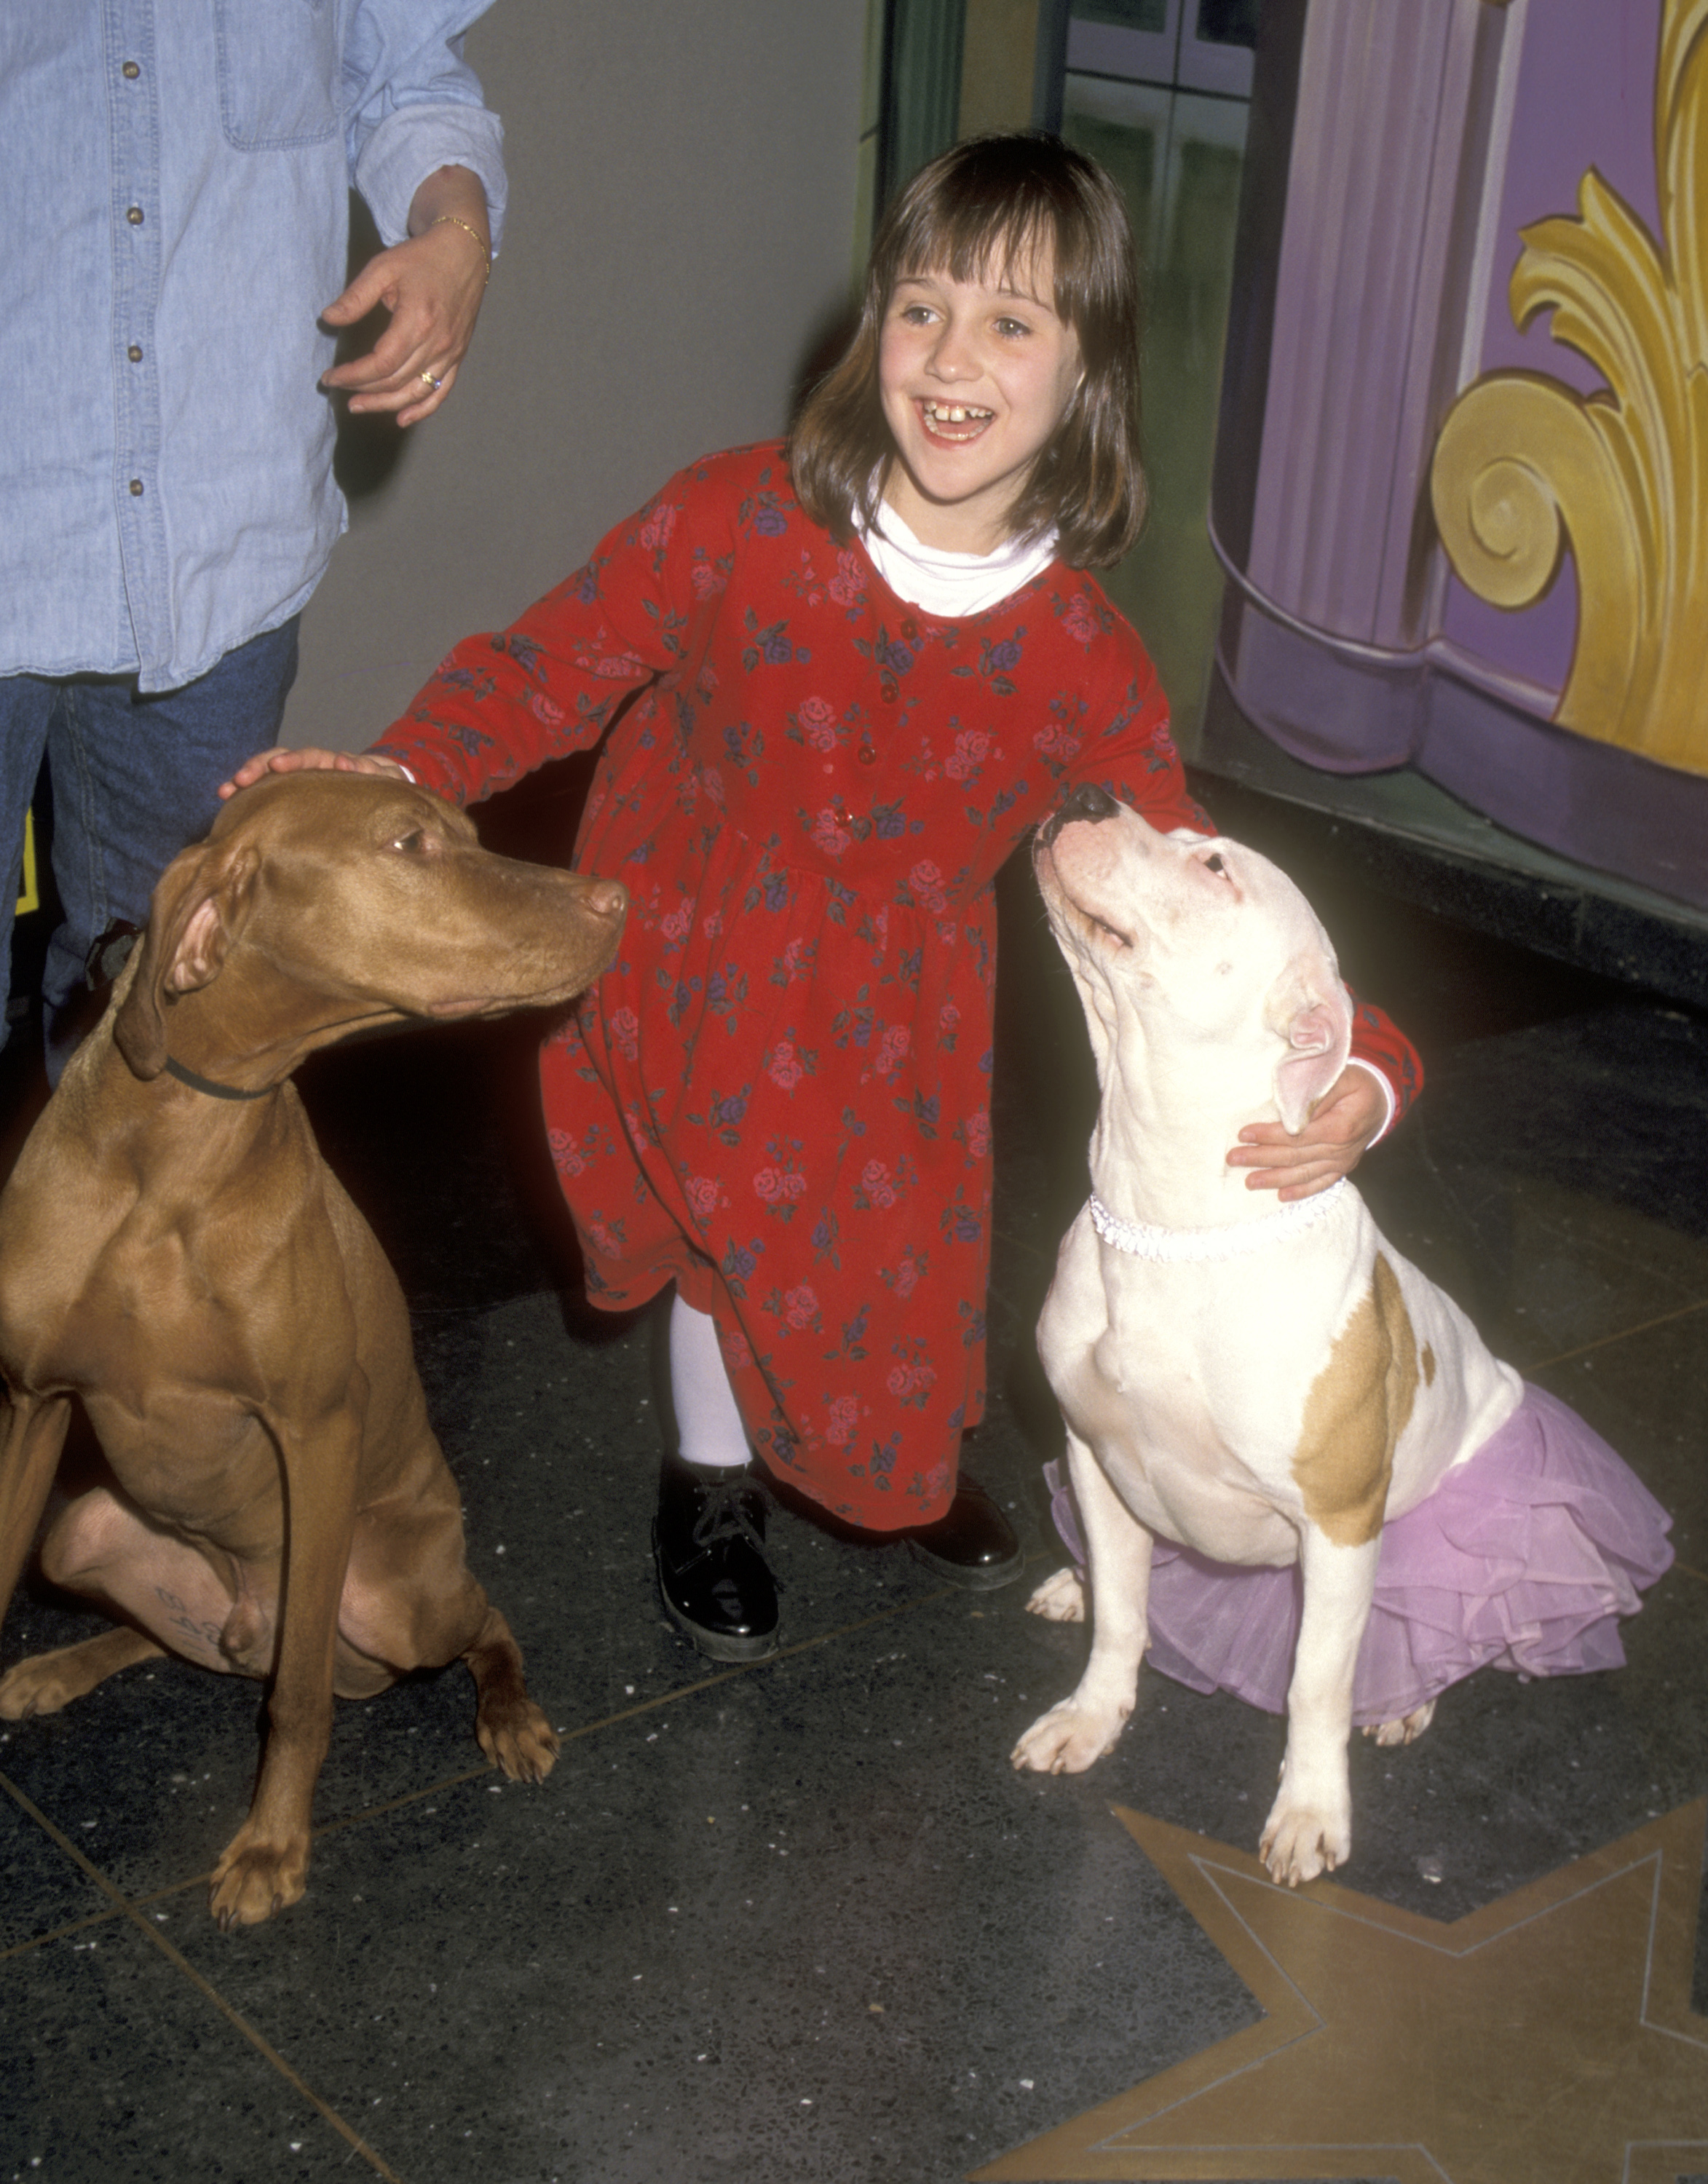 Mara Wilson attends the M&M's Candies Hollywood for Children Family Film Festival at Sony IMAX Theater in New York City, on April 8, 1996. | Source: Getty Images